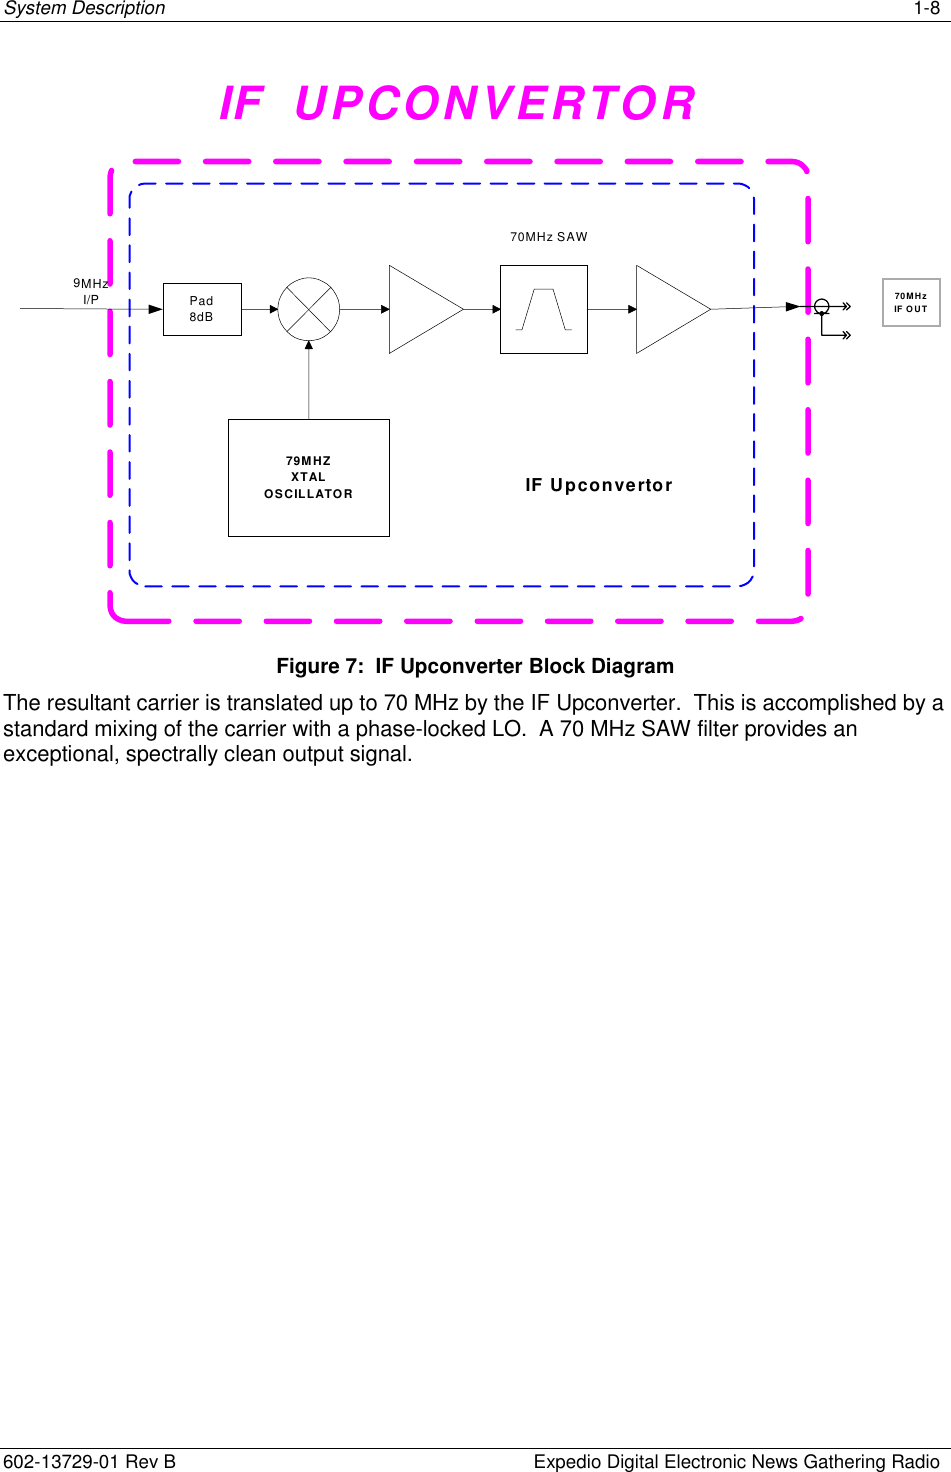 System Description   1-8  602-13729-01 Rev B    Expedio Digital Electronic News Gathering Radio IF  UPCONVERTOR79MHZXTALOSCILLATOR IF Upconvertor70MHz SAWPad8dB9MHzI/P70MHzIF OUT Figure 7:  IF Upconverter Block Diagram The resultant carrier is translated up to 70 MHz by the IF Upconverter.  This is accomplished by a standard mixing of the carrier with a phase-locked LO.  A 70 MHz SAW filter provides an exceptional, spectrally clean output signal. 